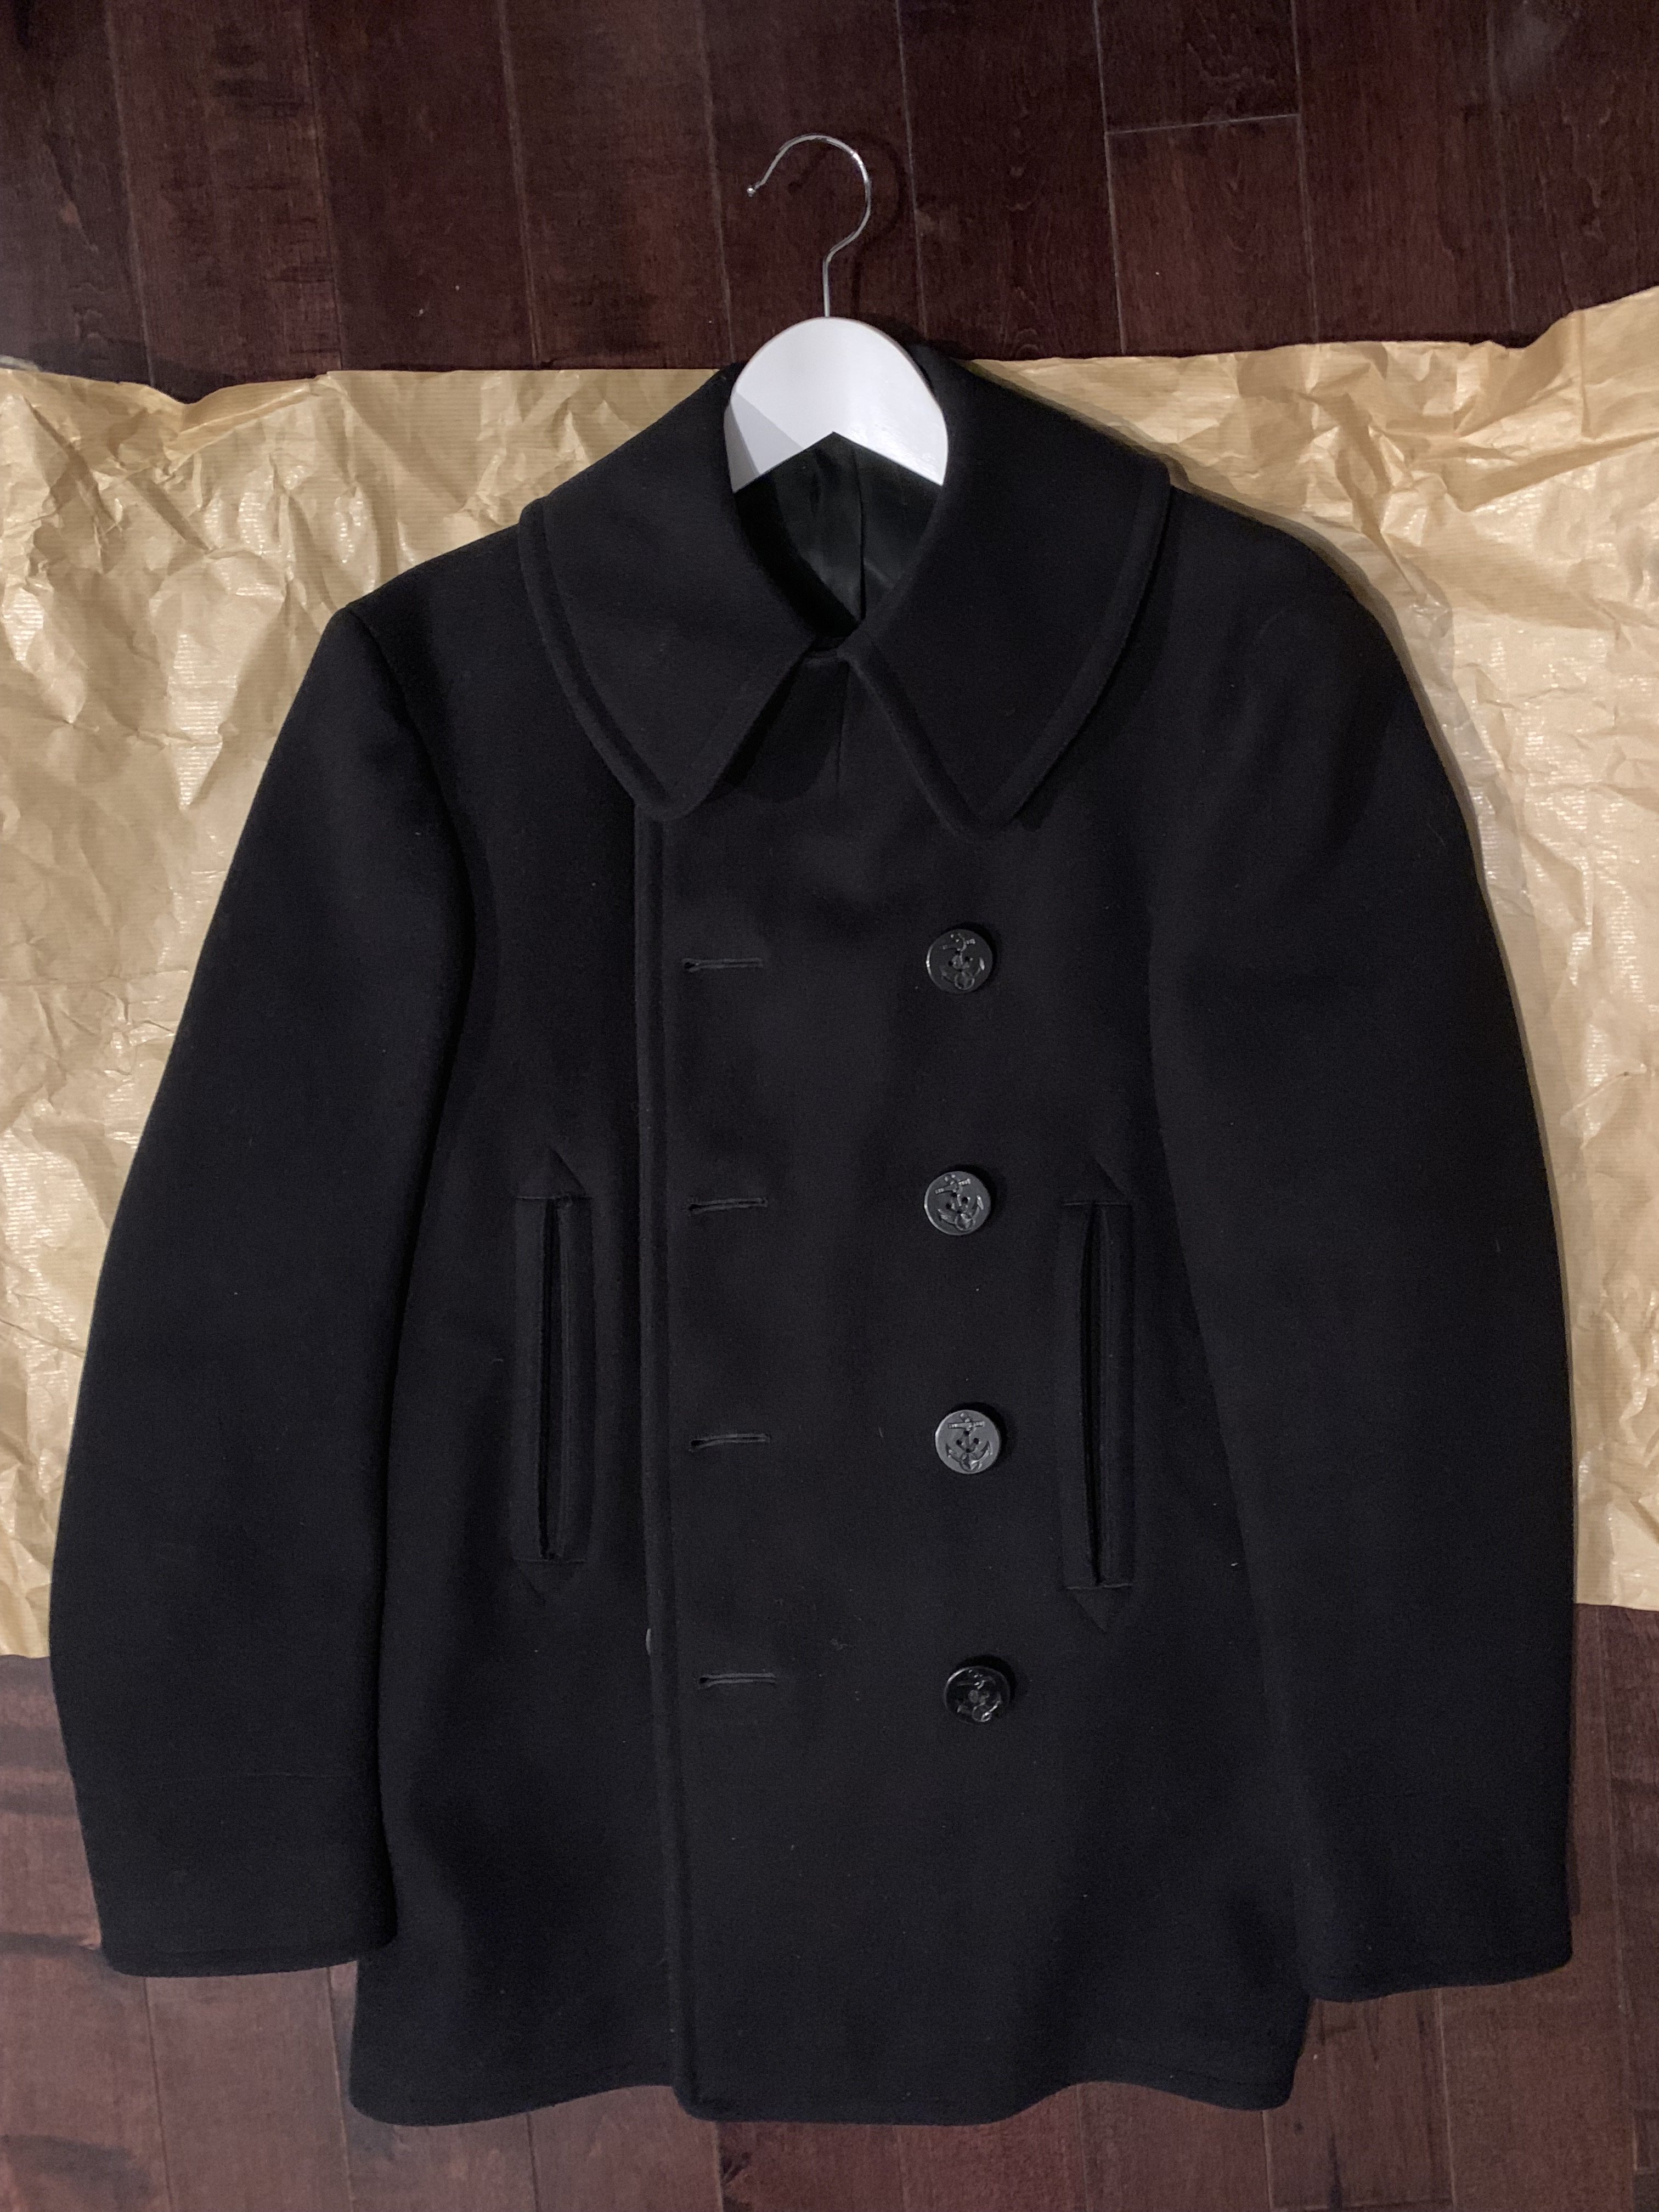 WW2 US Navy pea coat | Page 2 | Vintage Leather Jackets Forum